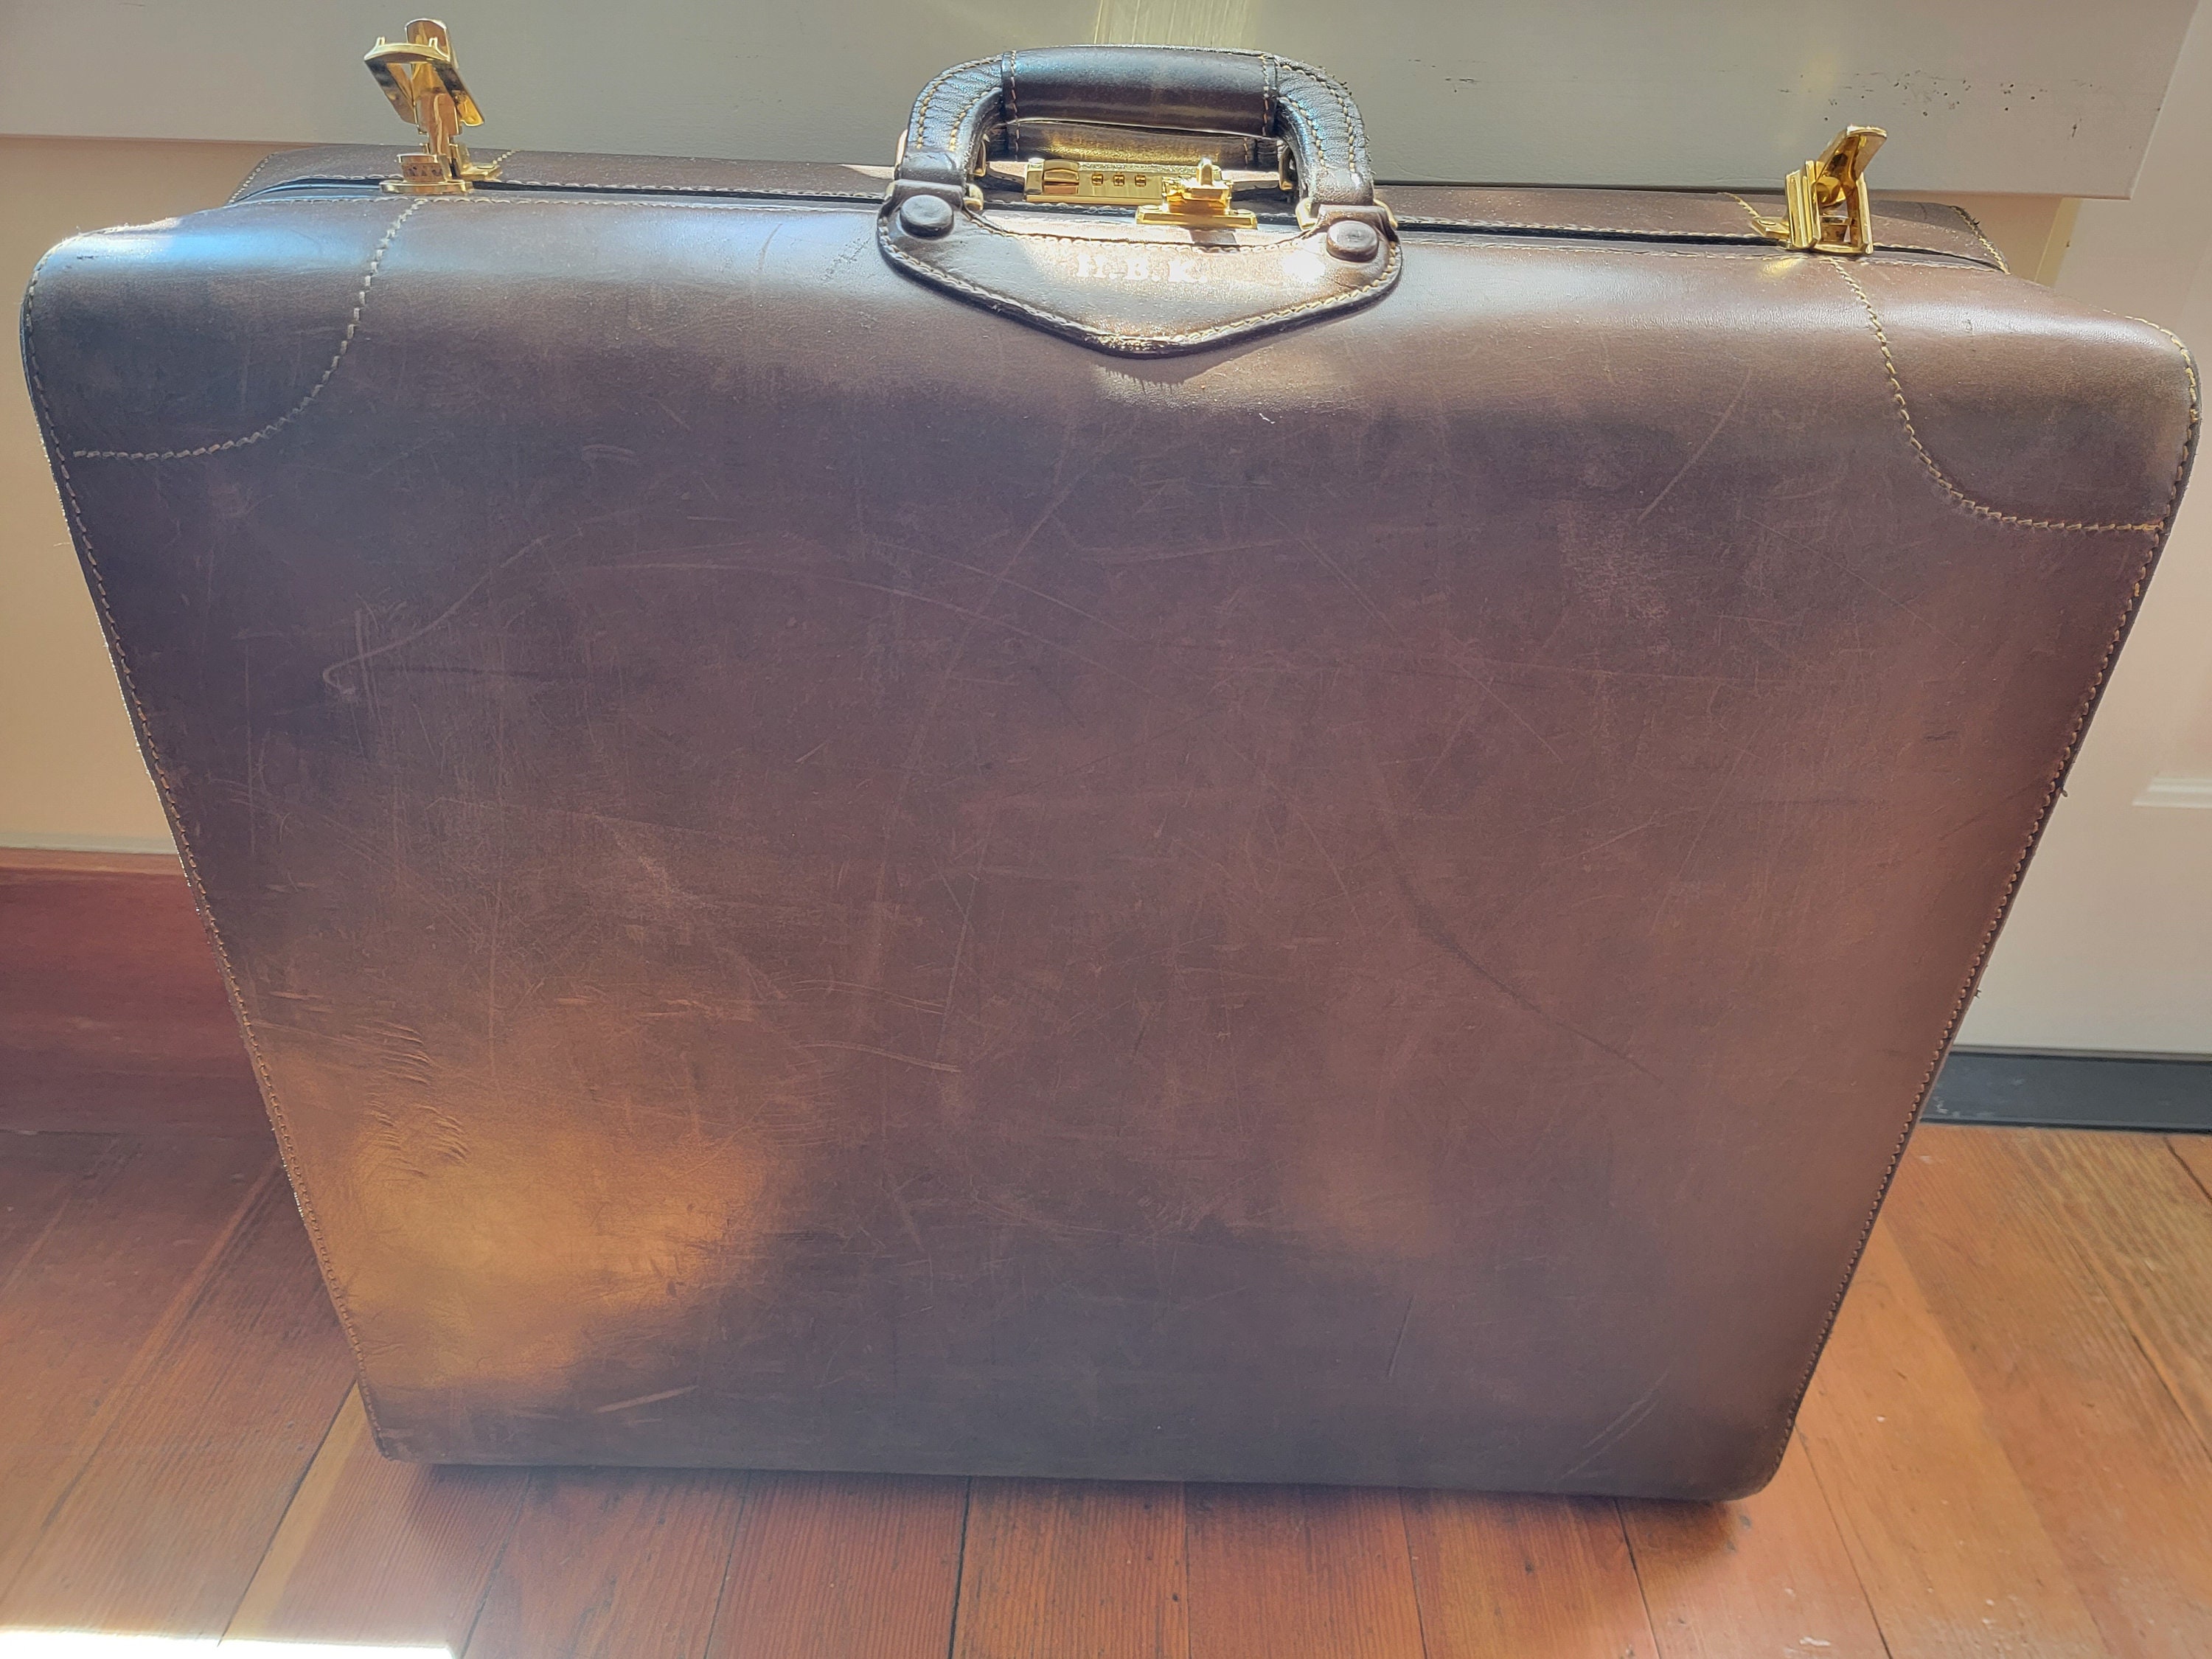 Decorative Clipper Closure for Suitcase – Made on Jupiter